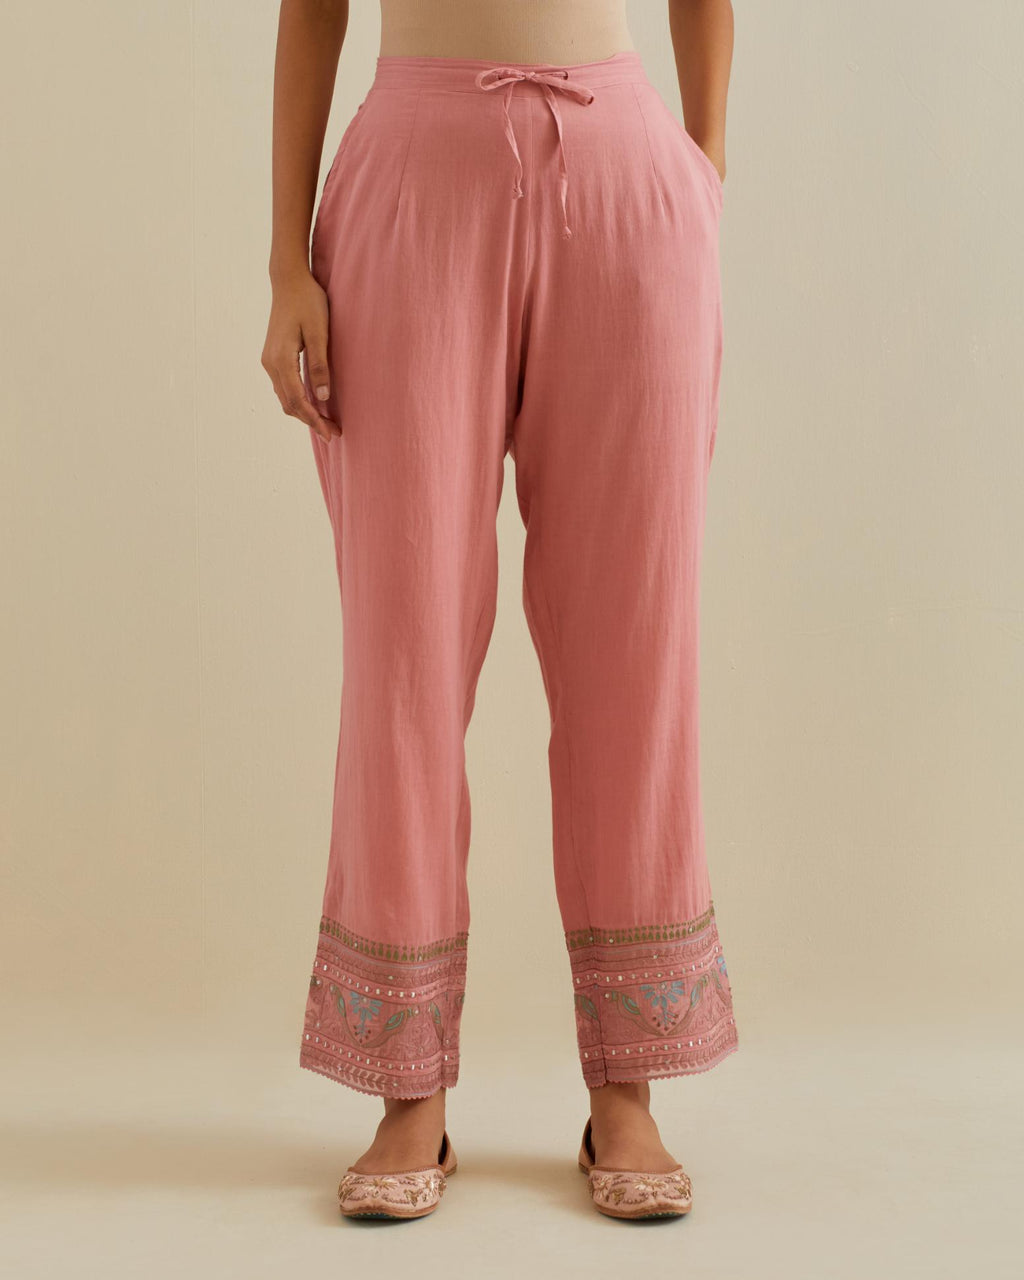 Pink straight pants with all over multi color embroidery detailed with sequins.